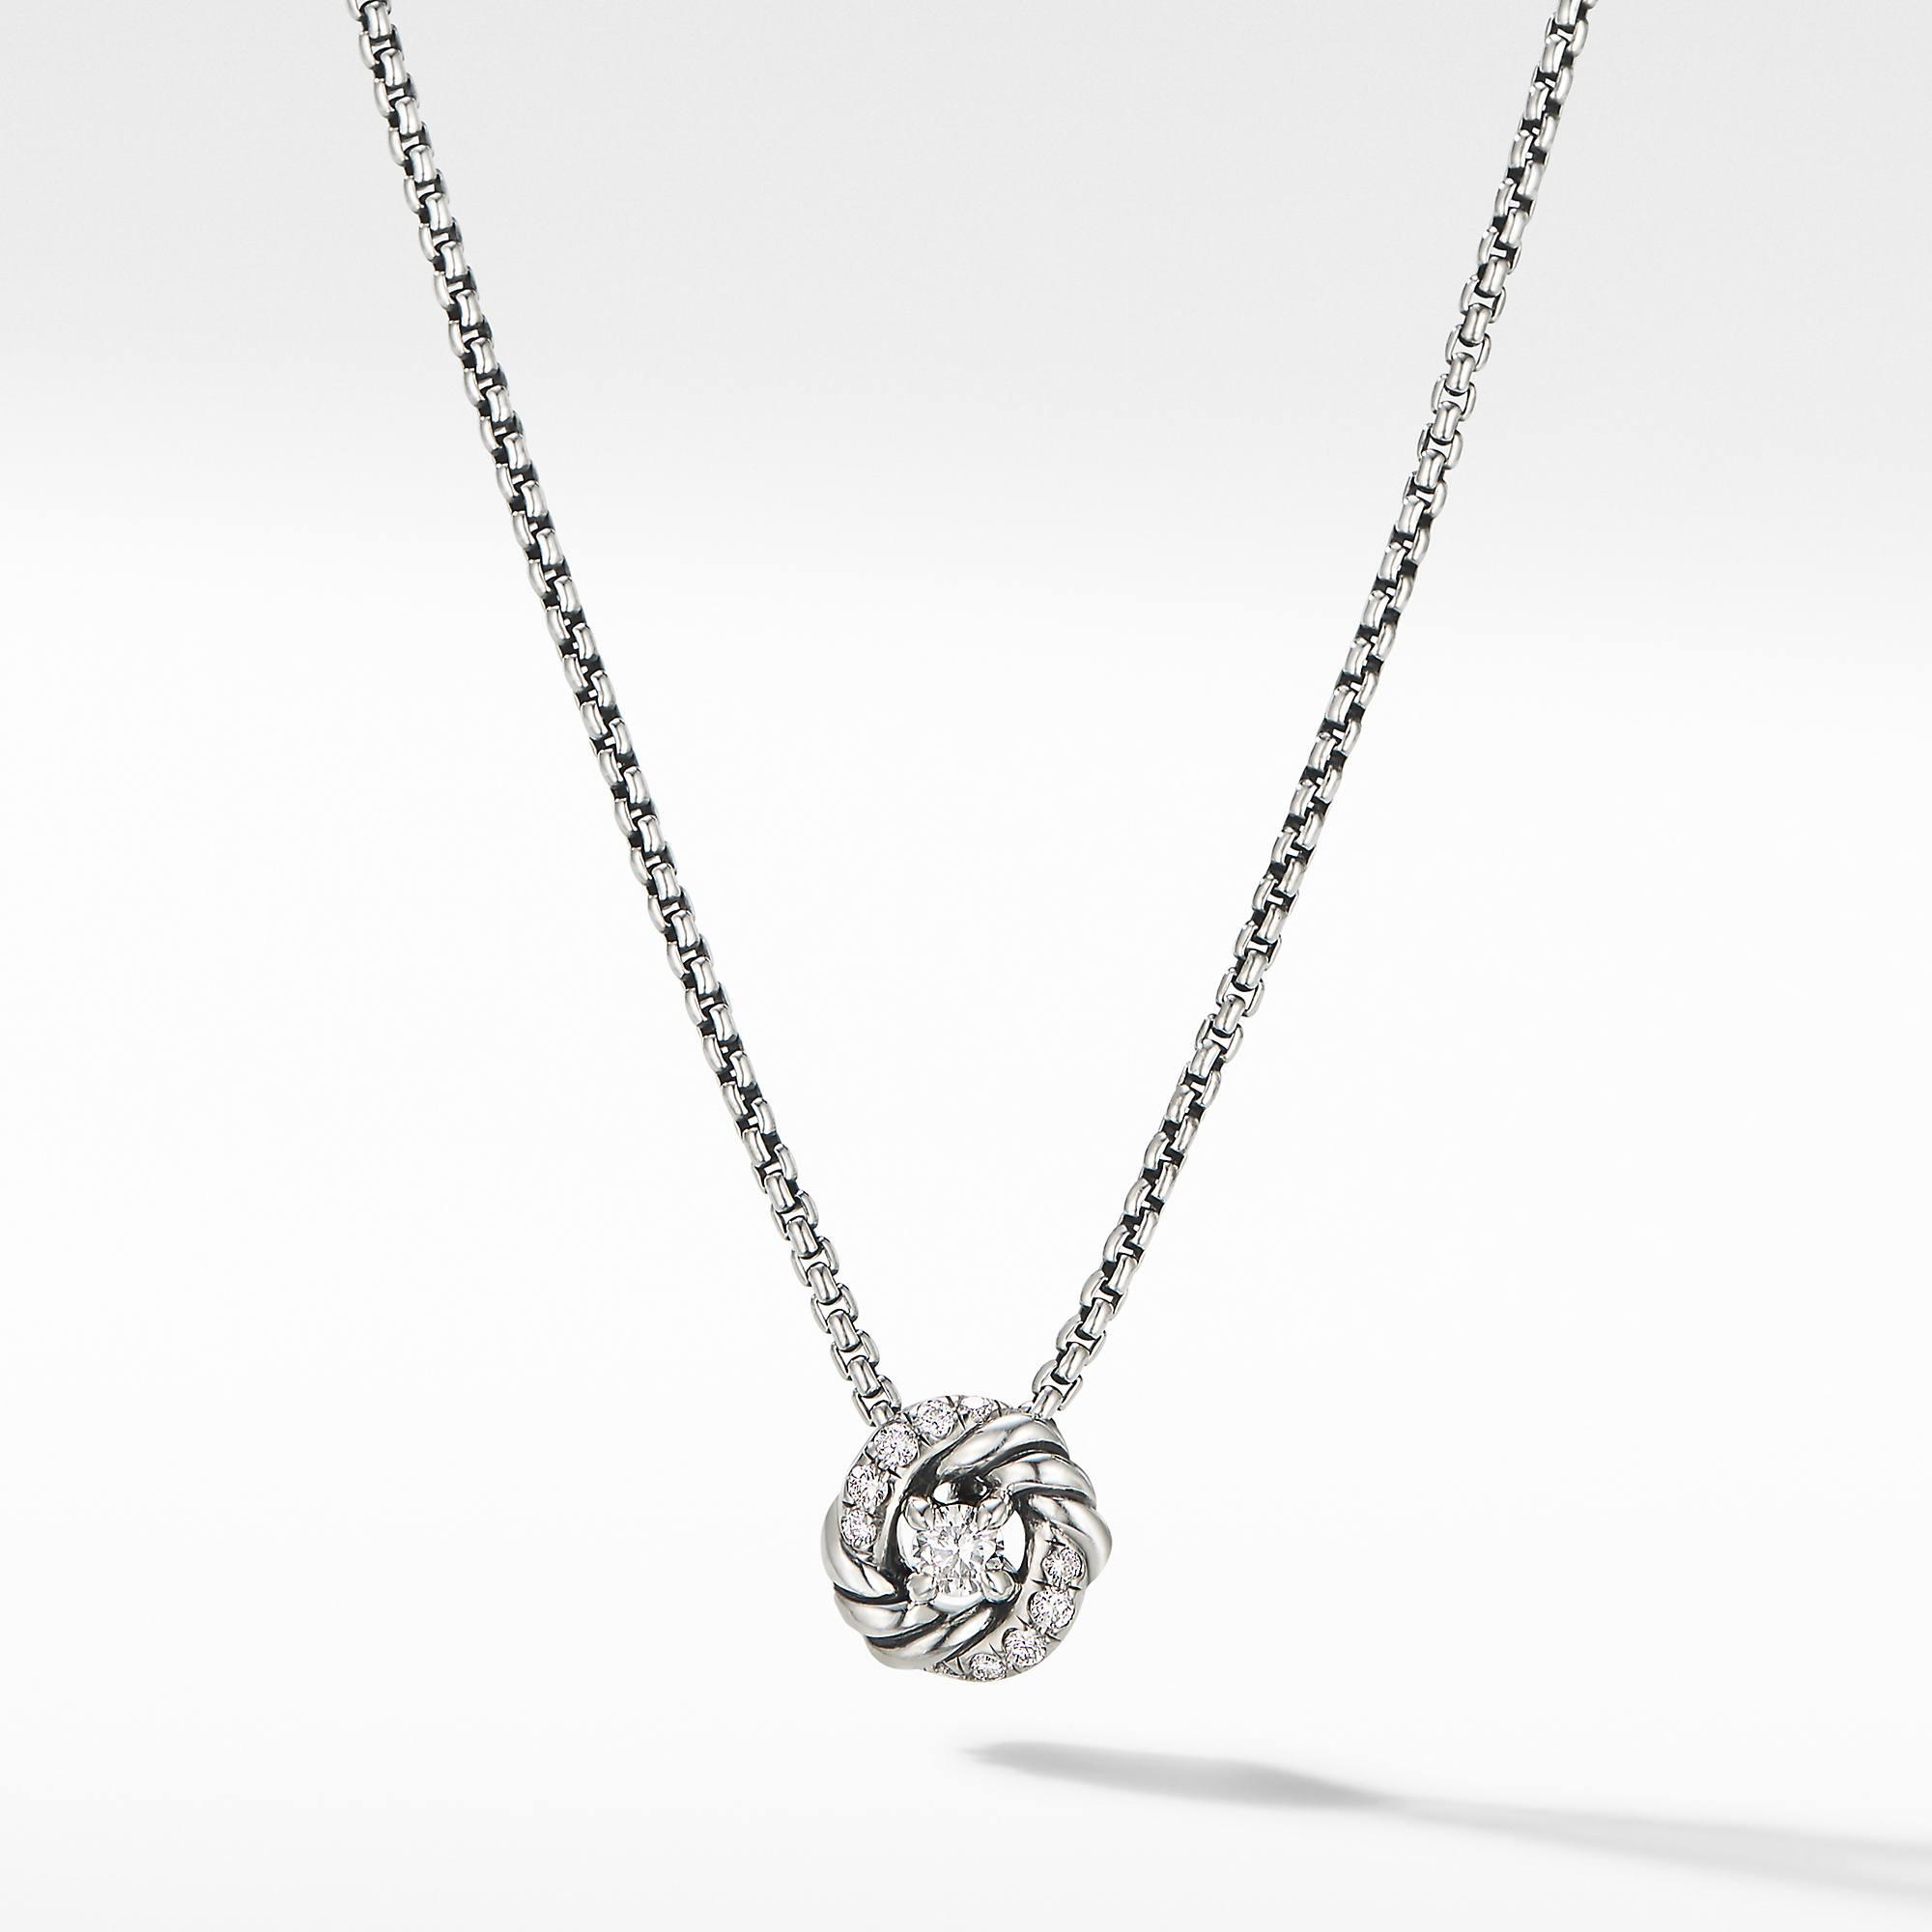 David Yurman Petite Infinity Pendant Necklace in Sterling Silver with Diamonds